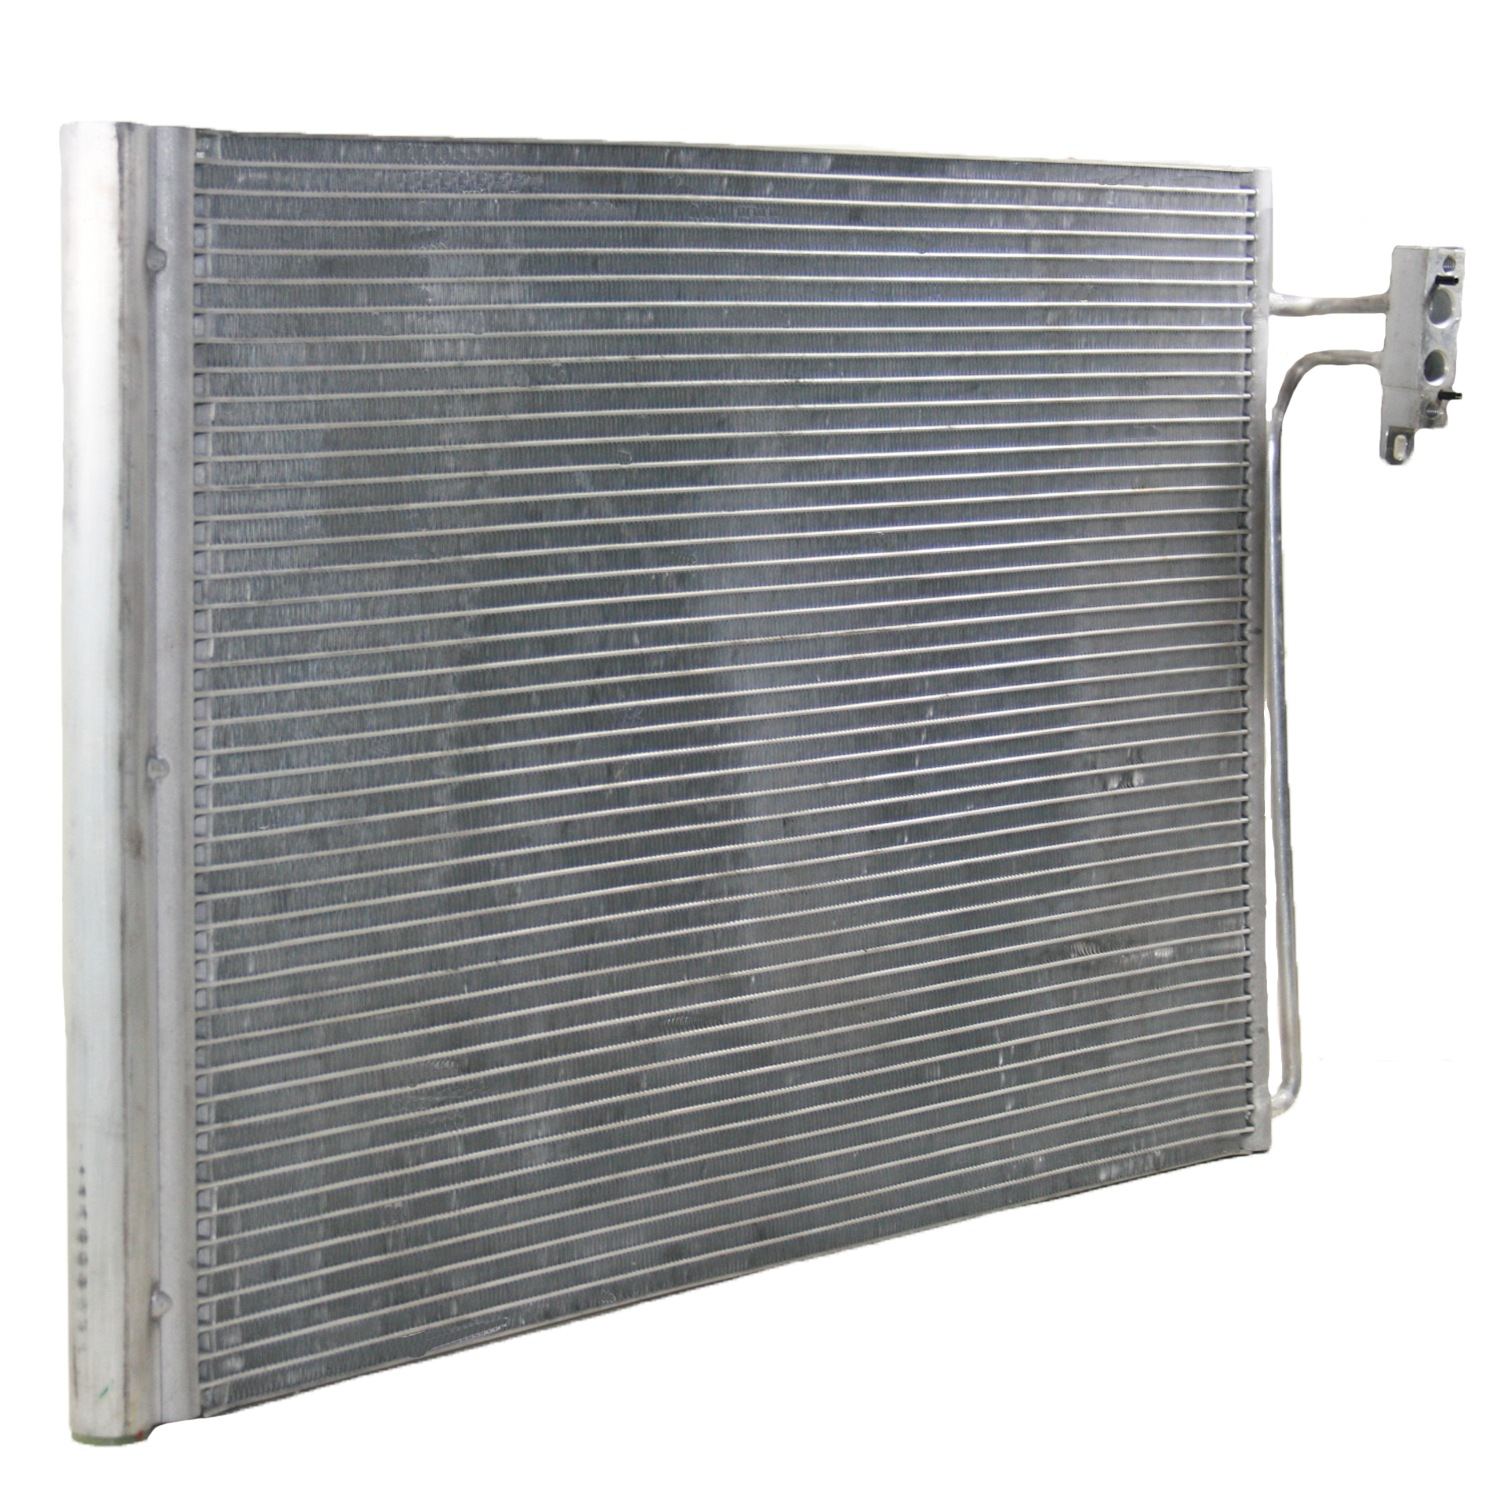 TCW Condenser 44-3422 New Product Image field_60b6a13a6e67c